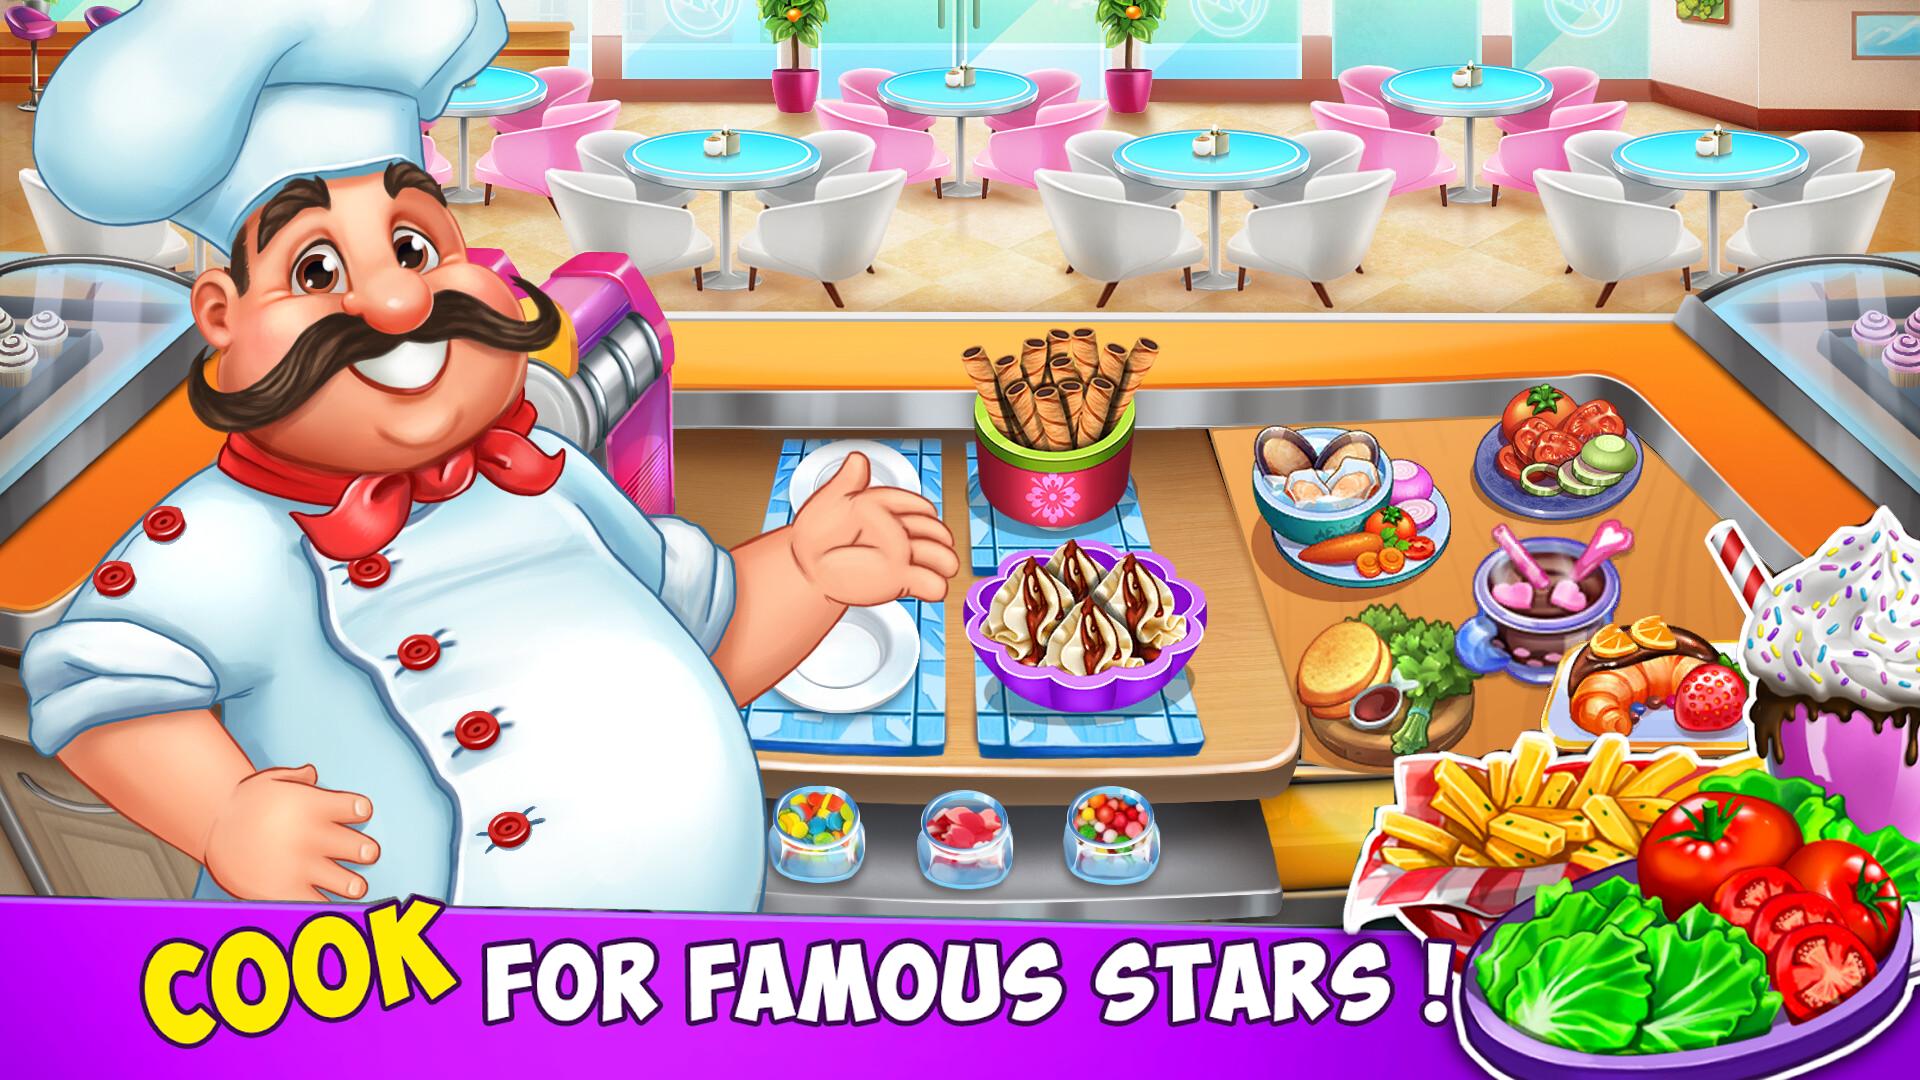 Игра Cooking Madness. Cooking Madness Mod. Cooking Madness -a Chef's game Mod. Кухня для изучения слов. Hot cooking